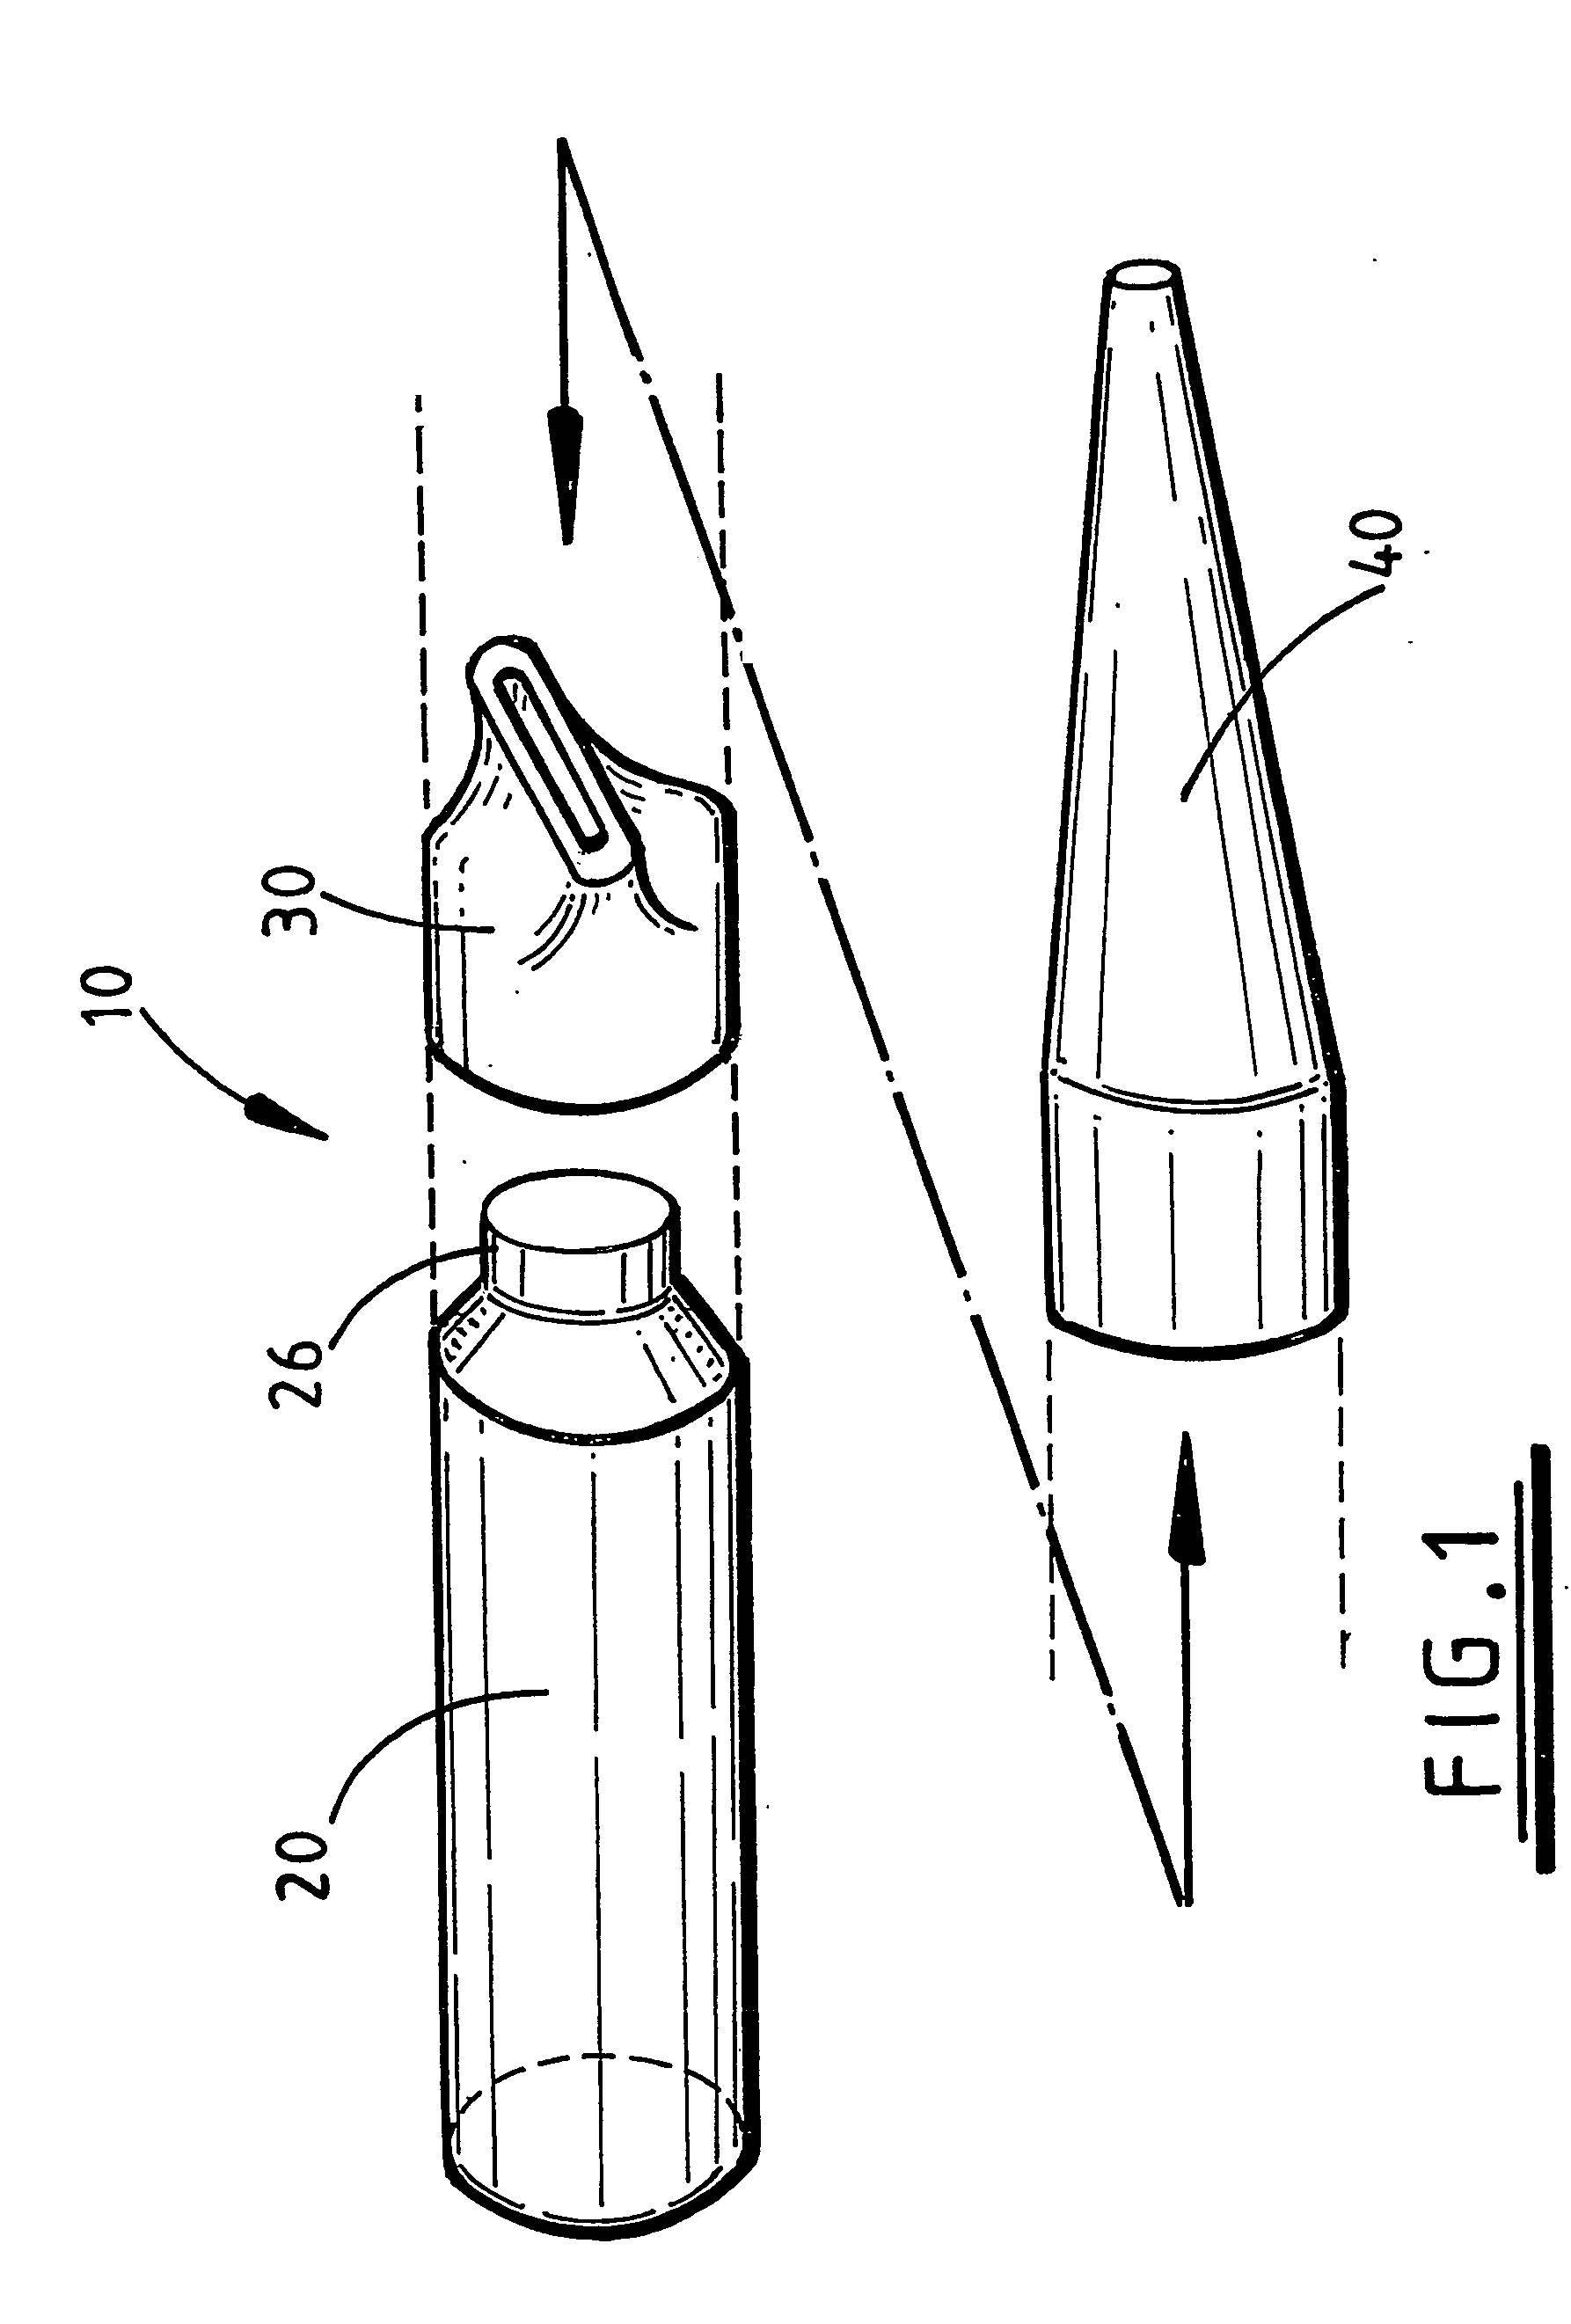 Applicator for tissue adhesive